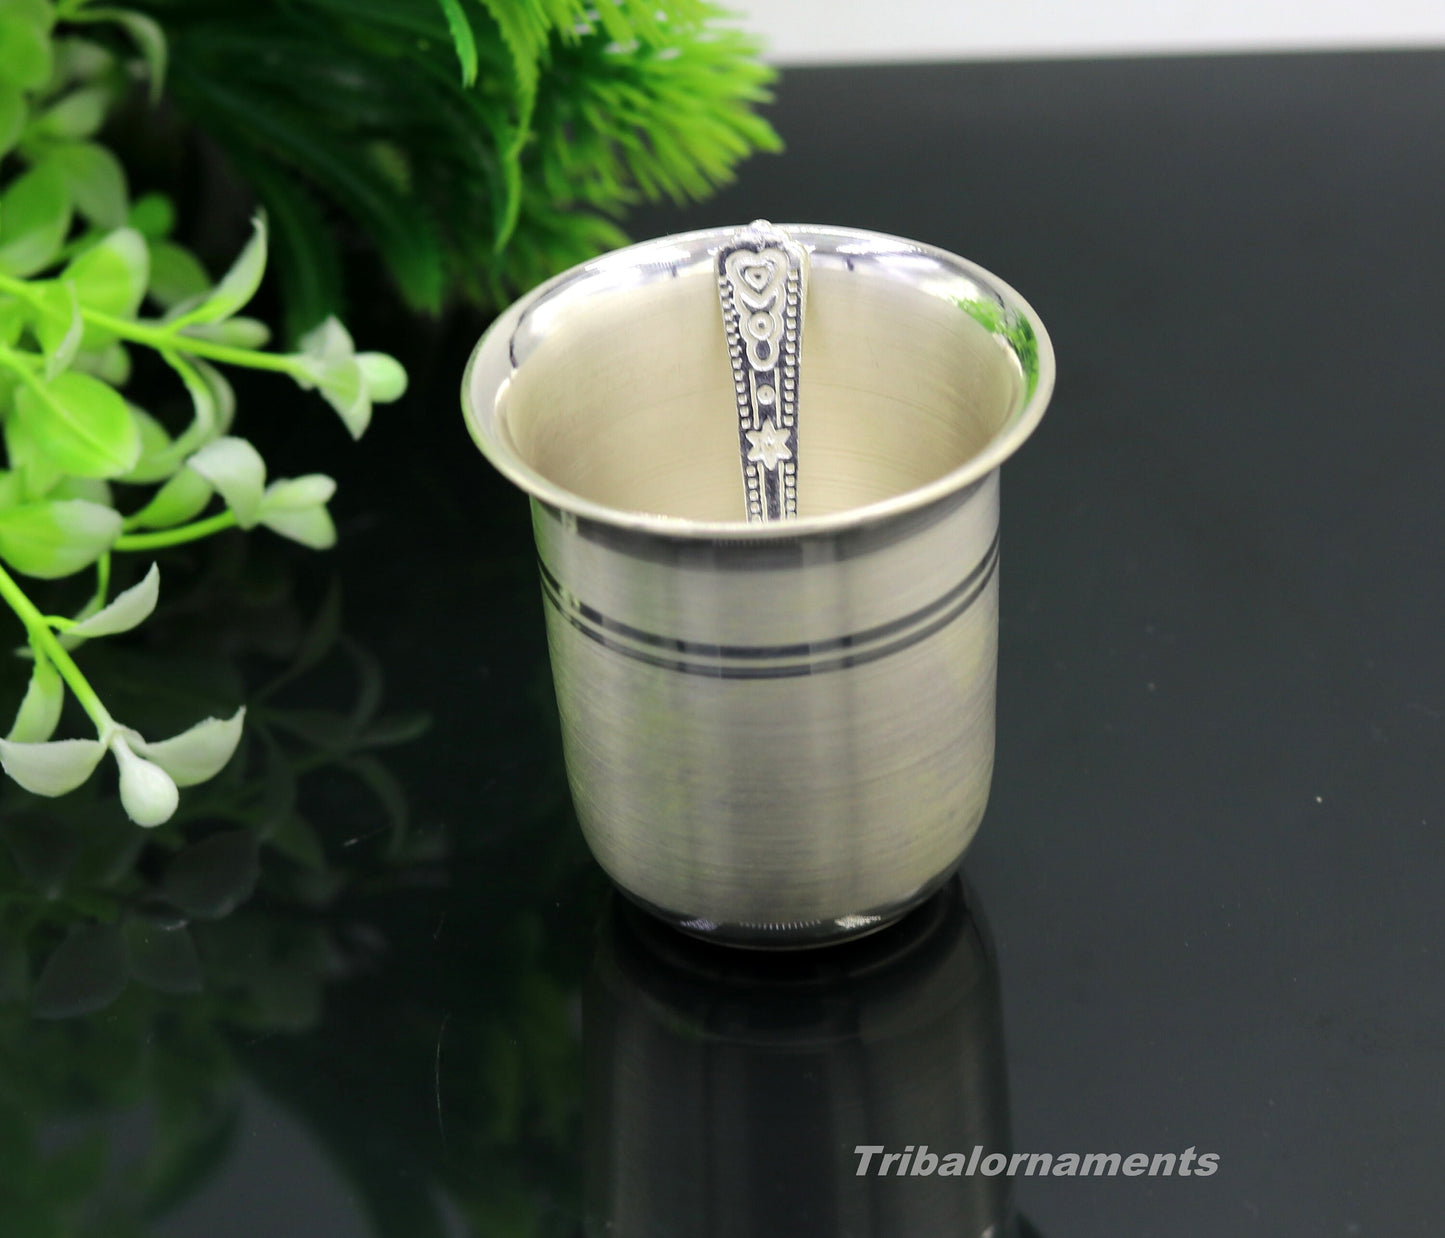 999 fine silver handmade water/milk Glass tumbler, silver flask, baby kids silver utensils set for stay healthy, best gifting article sv137 - TRIBAL ORNAMENTS